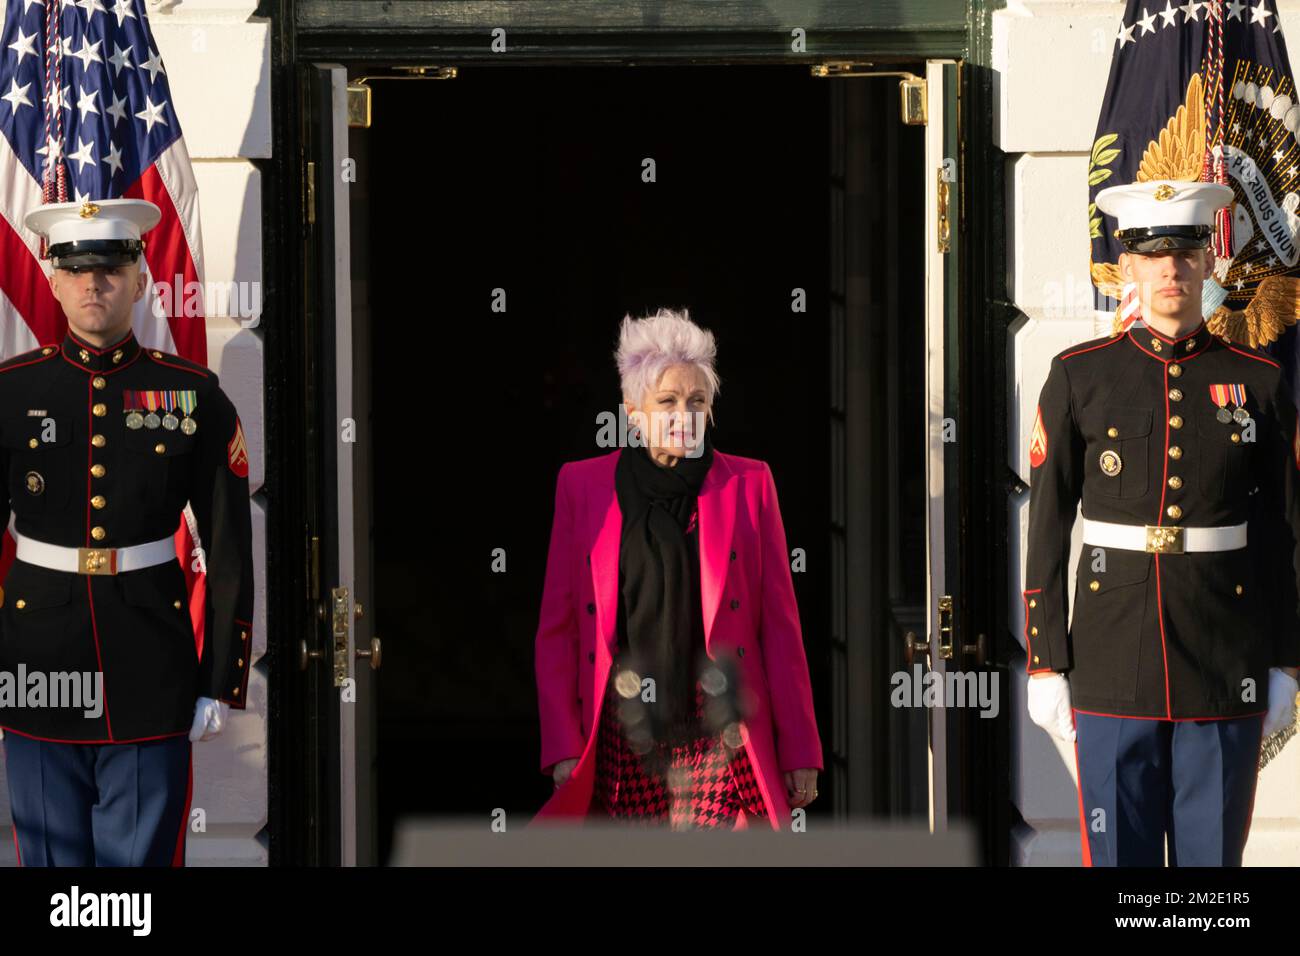 Singer Cyndi Lauper arrives to perform in a ceremony with US President Joe Biden to sign the Respect for Marriage Act on the South Lawn of the White House in Washington, DC on December 13, 2022. Credit: Chris Kleponis/Pool via CNP Stock Photo